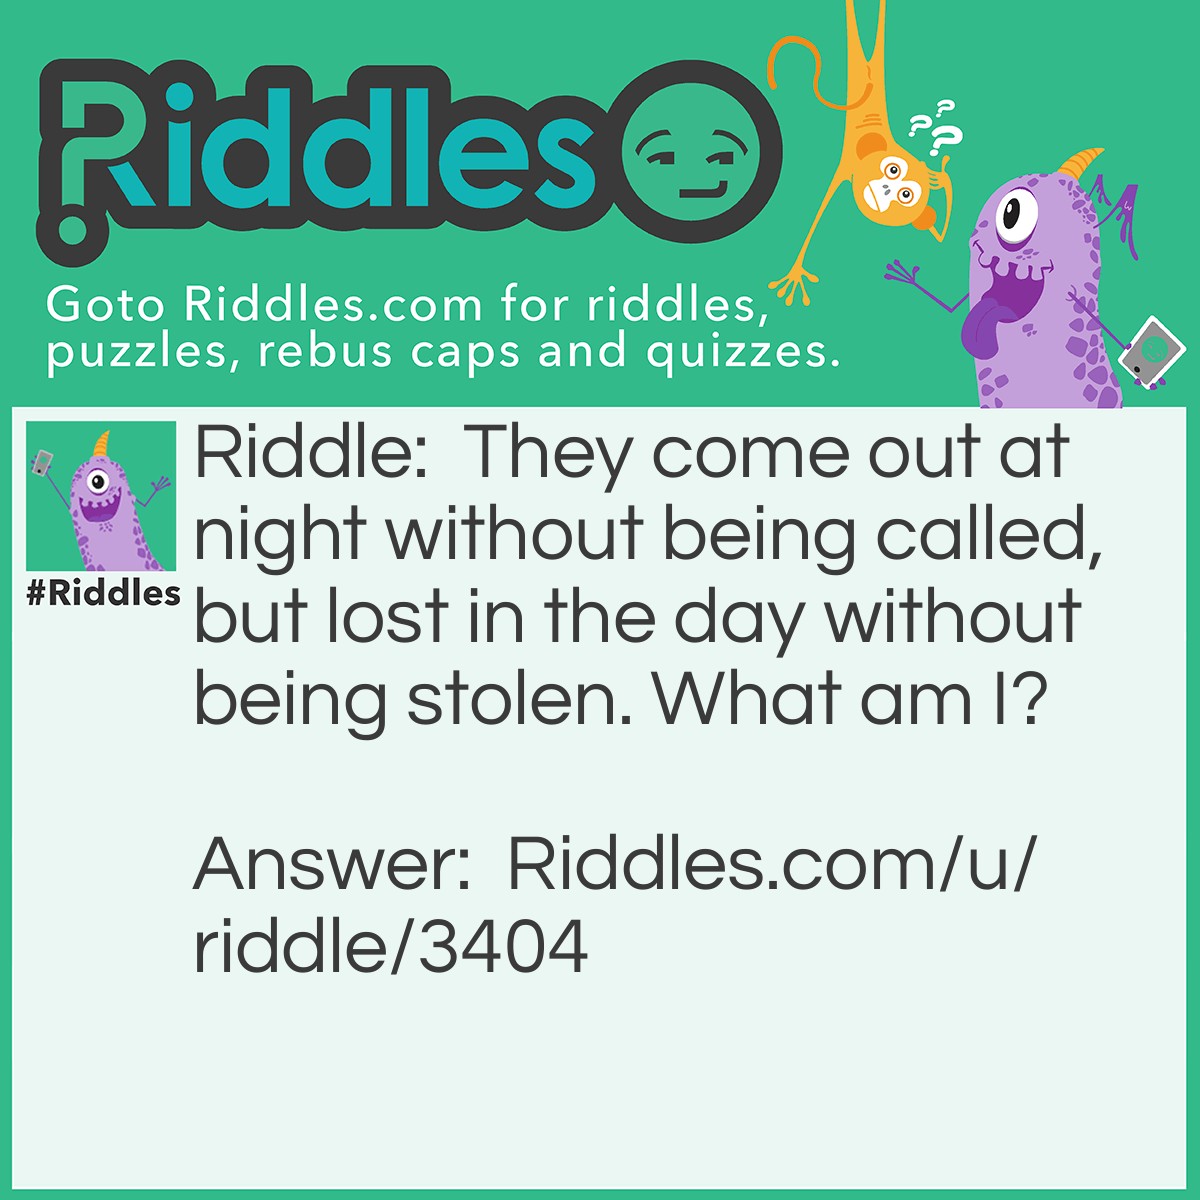 Riddle: They come out at night without being called, but lost in the day without being stolen. What am I? Answer: Stars!